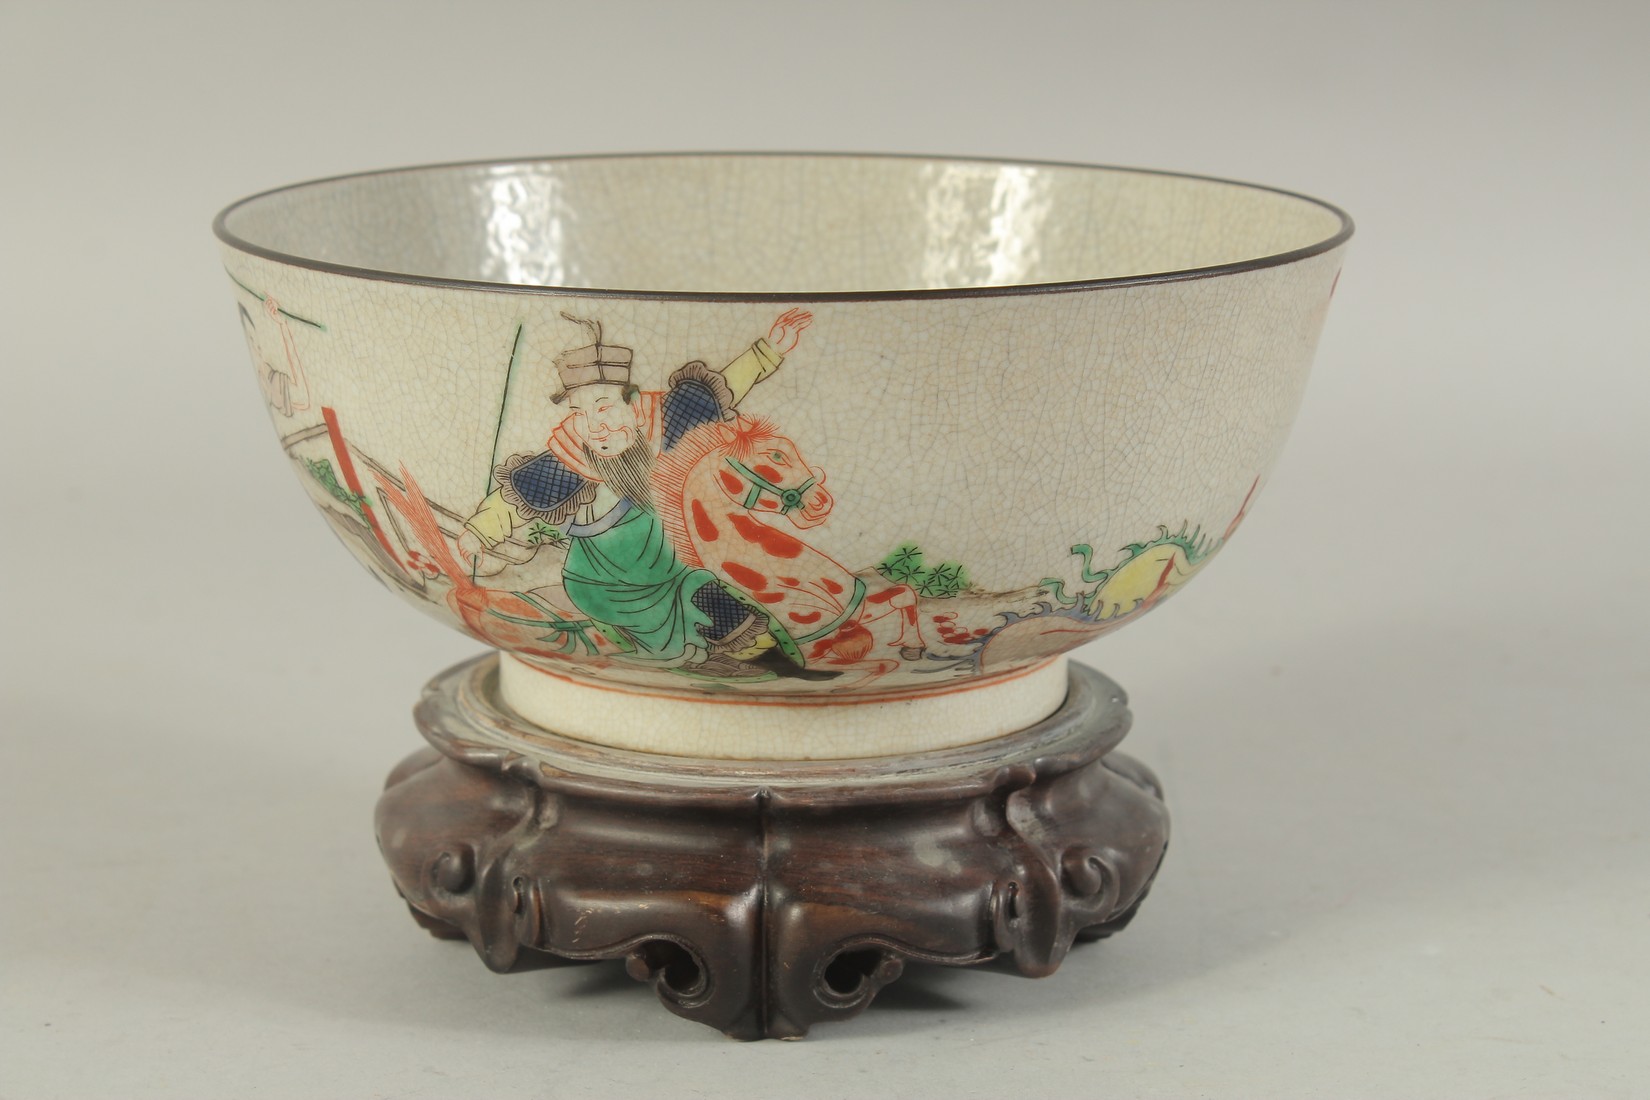 A CHINESE FAMILLE VERTE PORCELAIN BOWL - possibly Qing dynasty, with hardwood stand, the exterior - Image 3 of 7